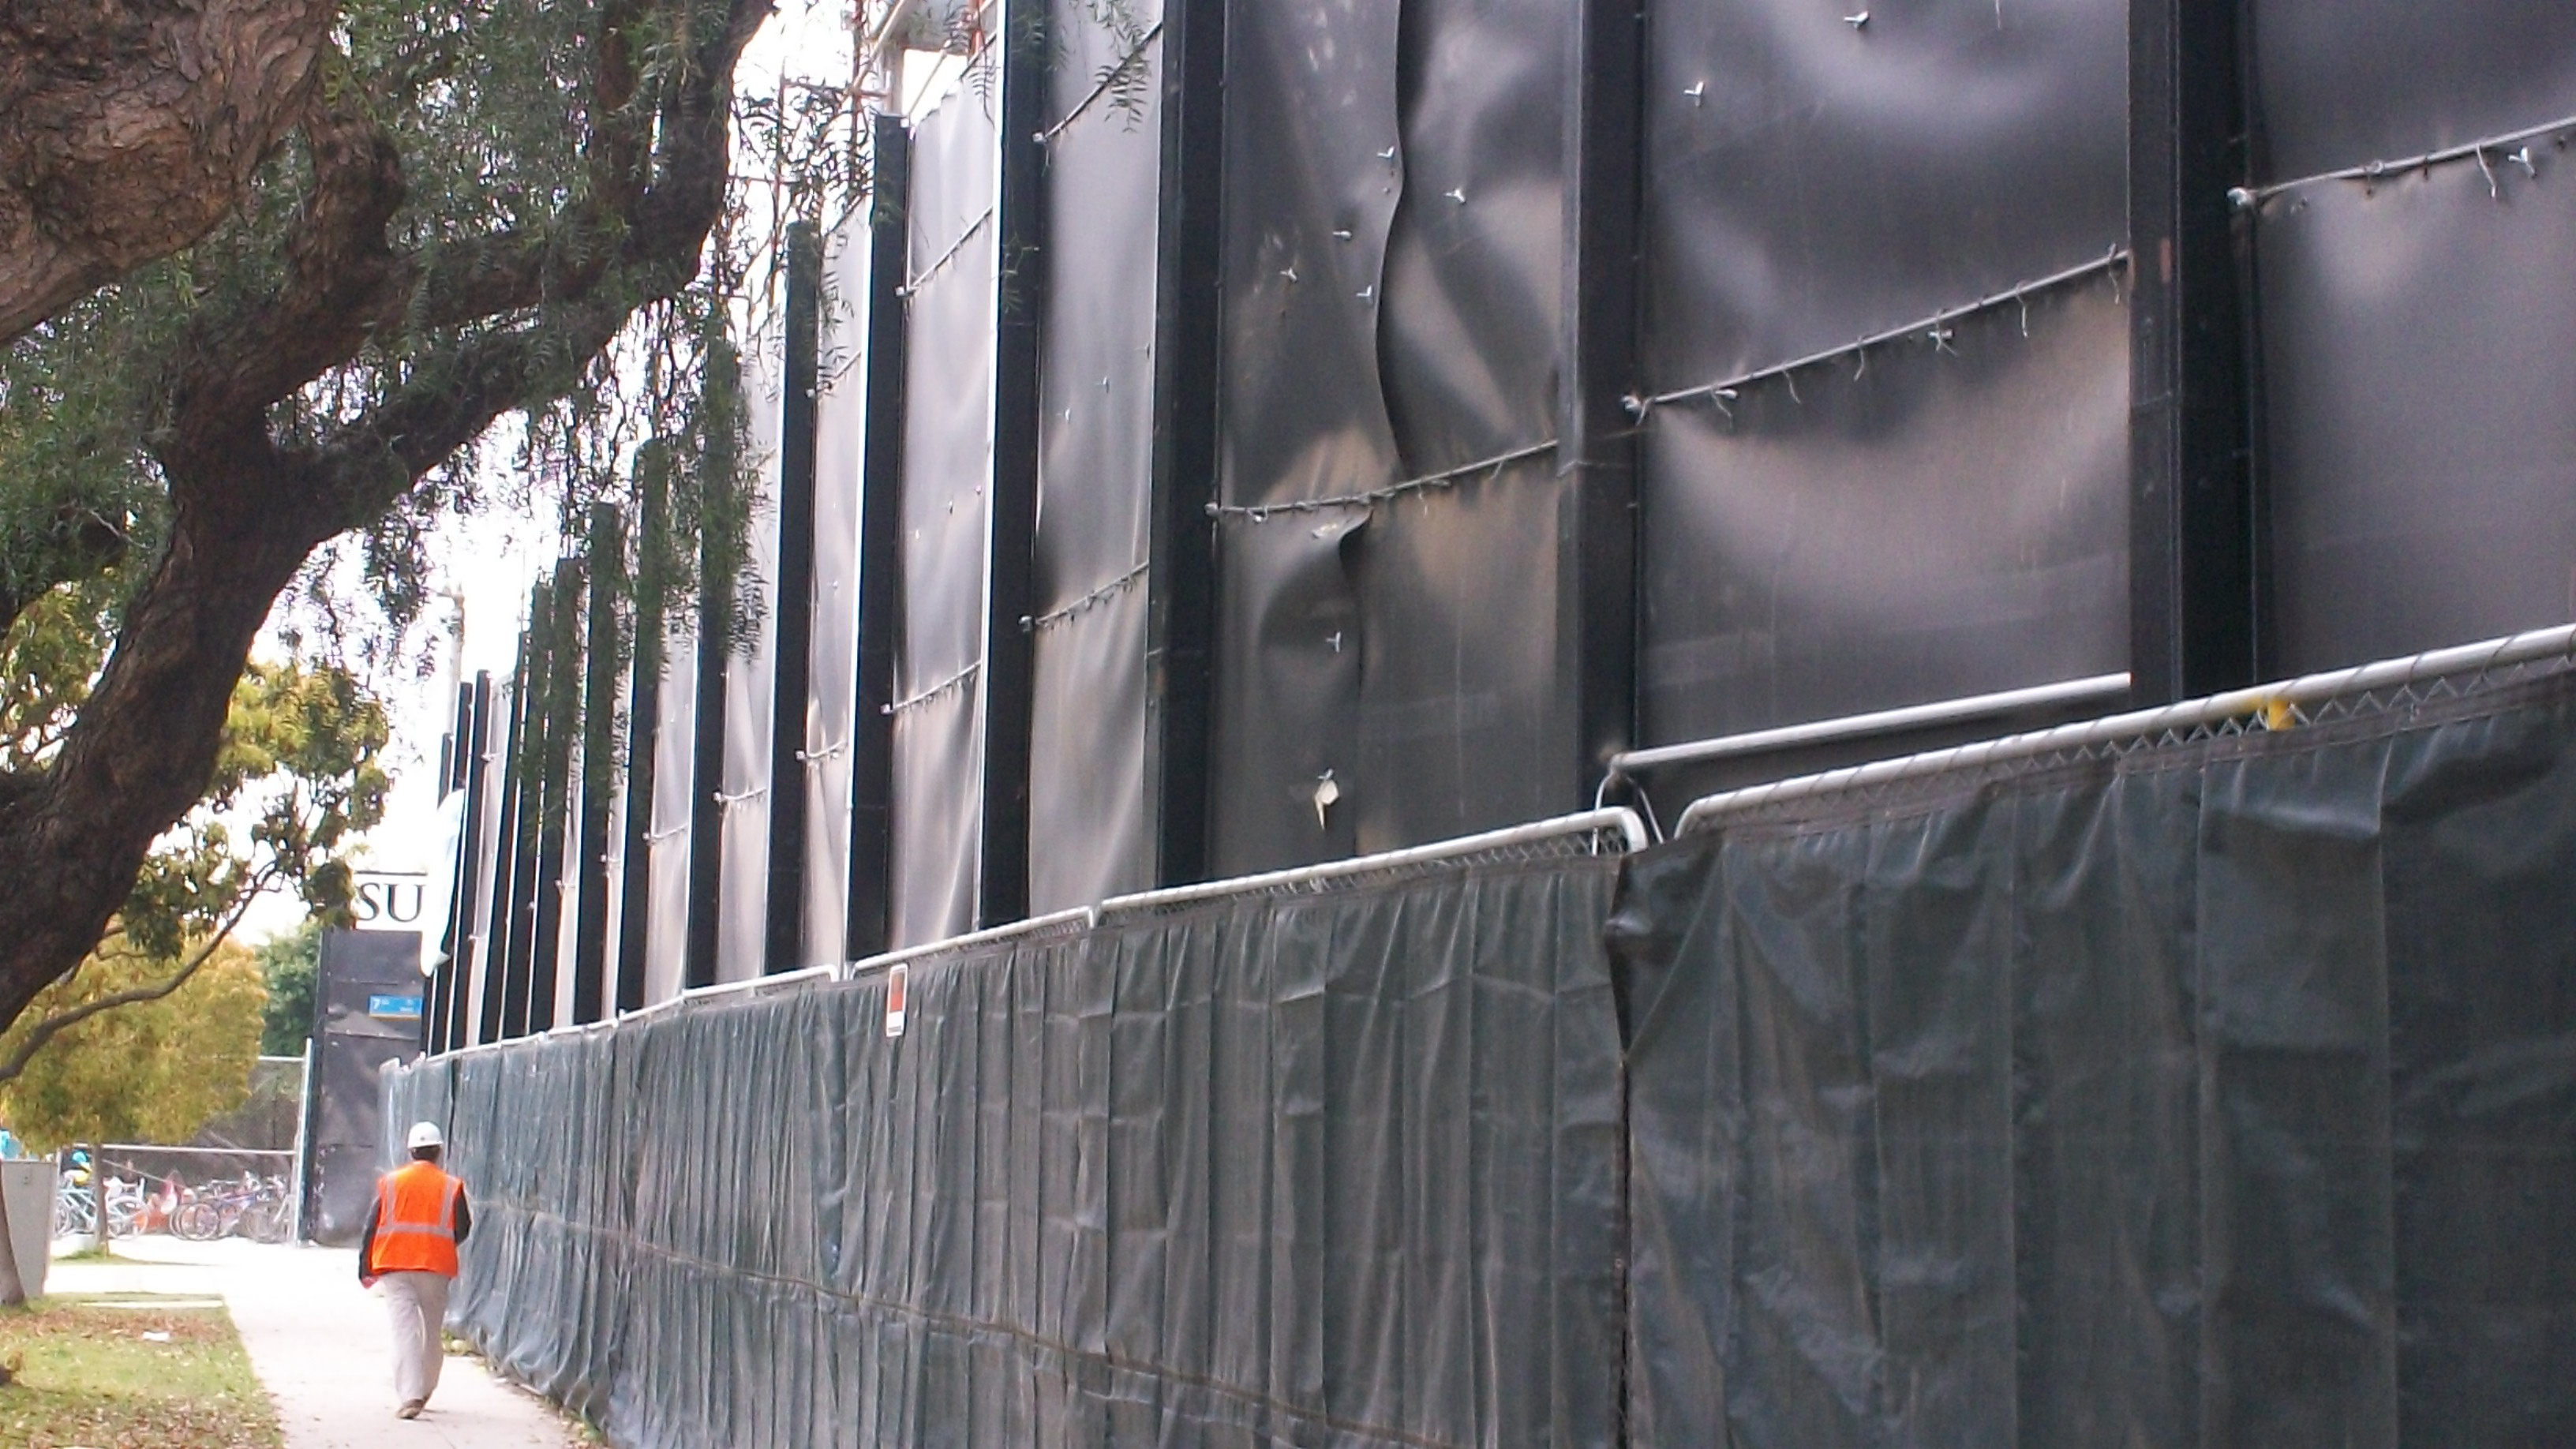 A construction worker walks on the outside portion of the 30-foot tall section of the Acoustifence barrier. The fence design utilized varying heights at different sections of the construction site.